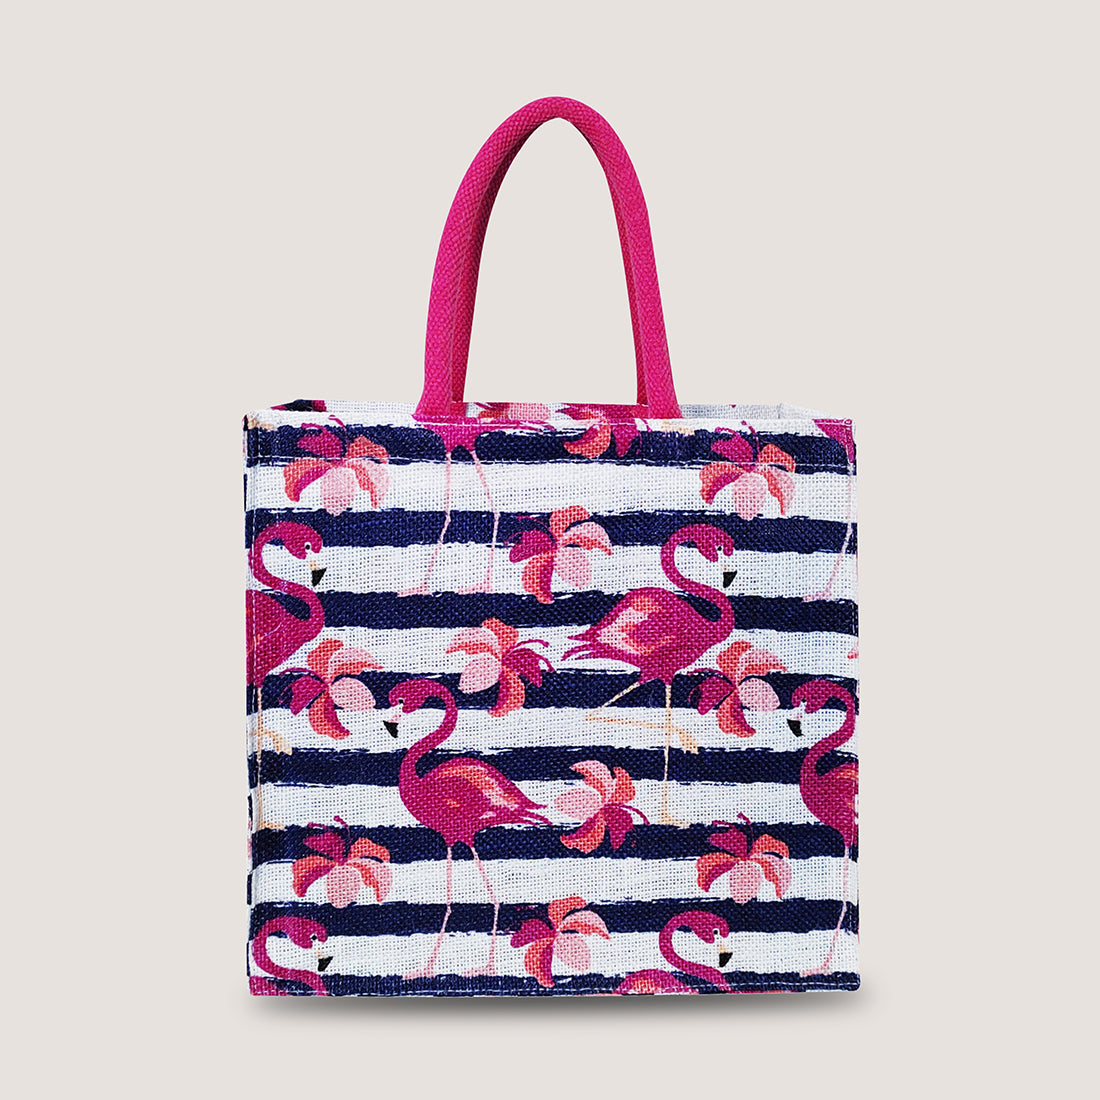 EARTHBAGS FLAMINGO PRINTED LUNCH BAG WITH PADDED HANDLES